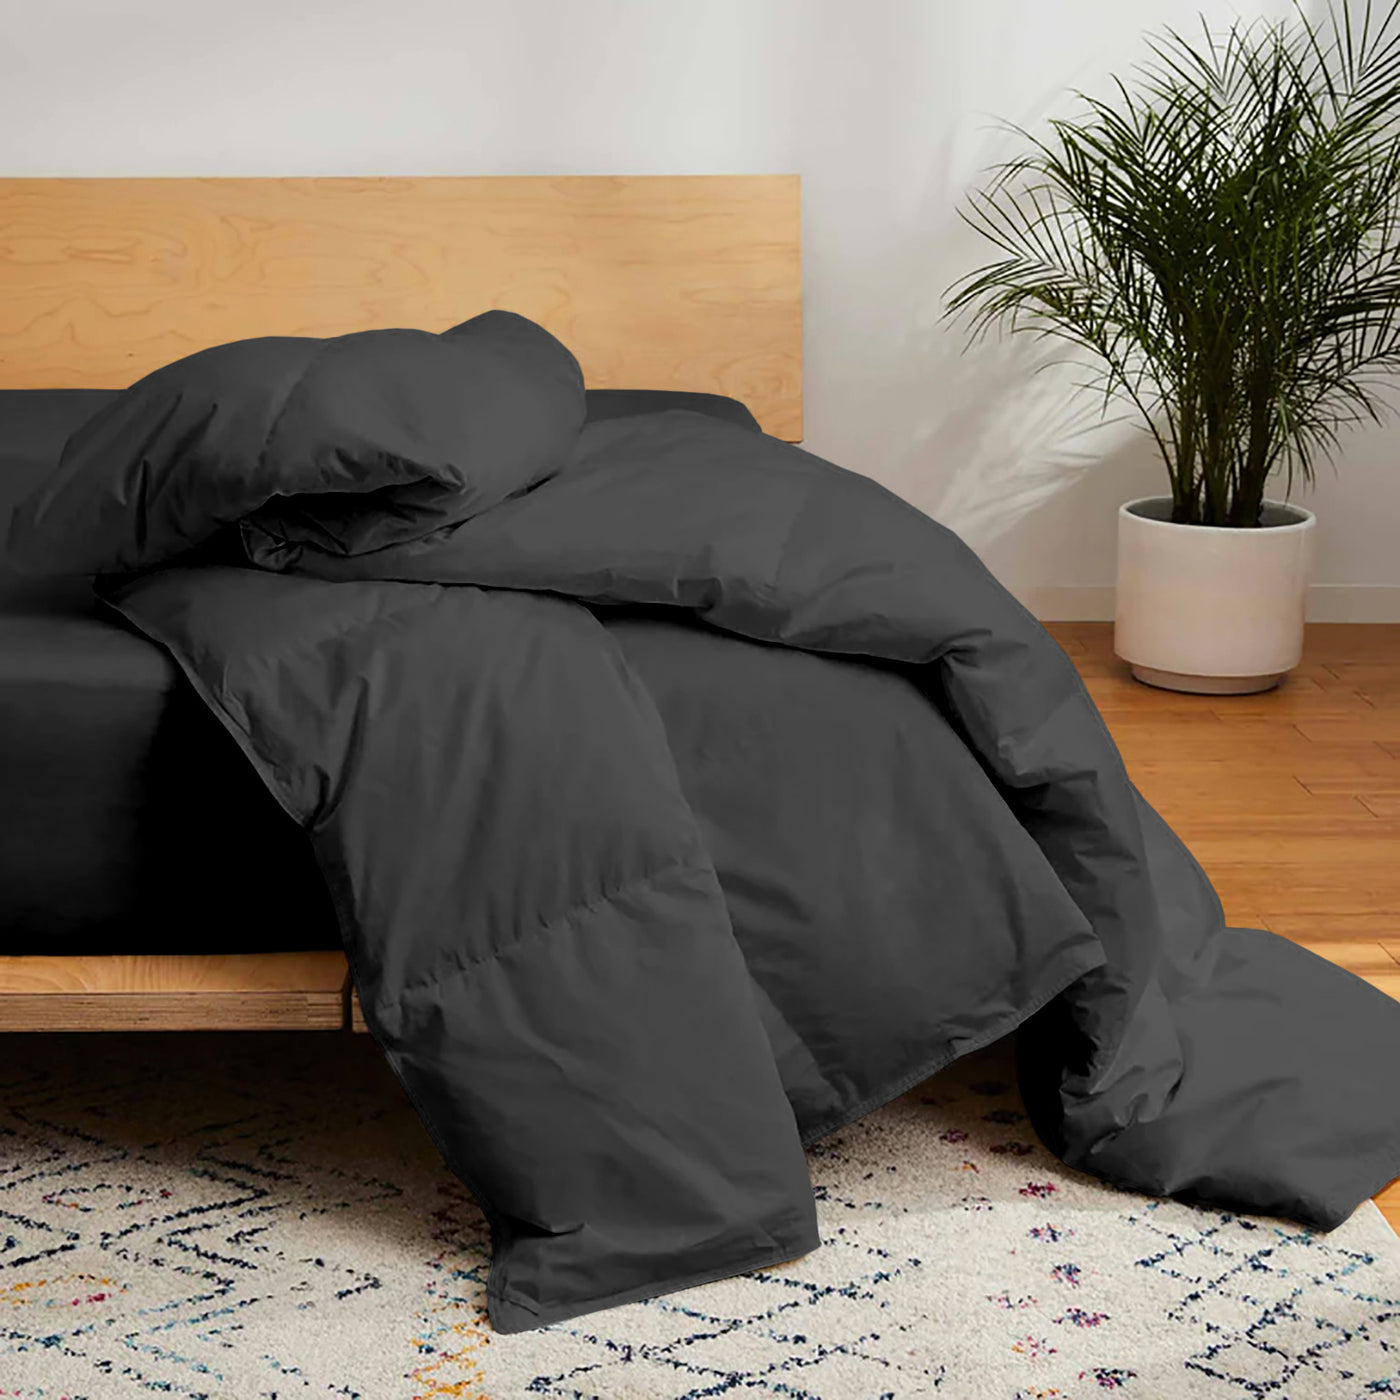 Solid Down Alternative Comforter with Organic Cotton Exterior & Microfiber Fill 600 Thread Count